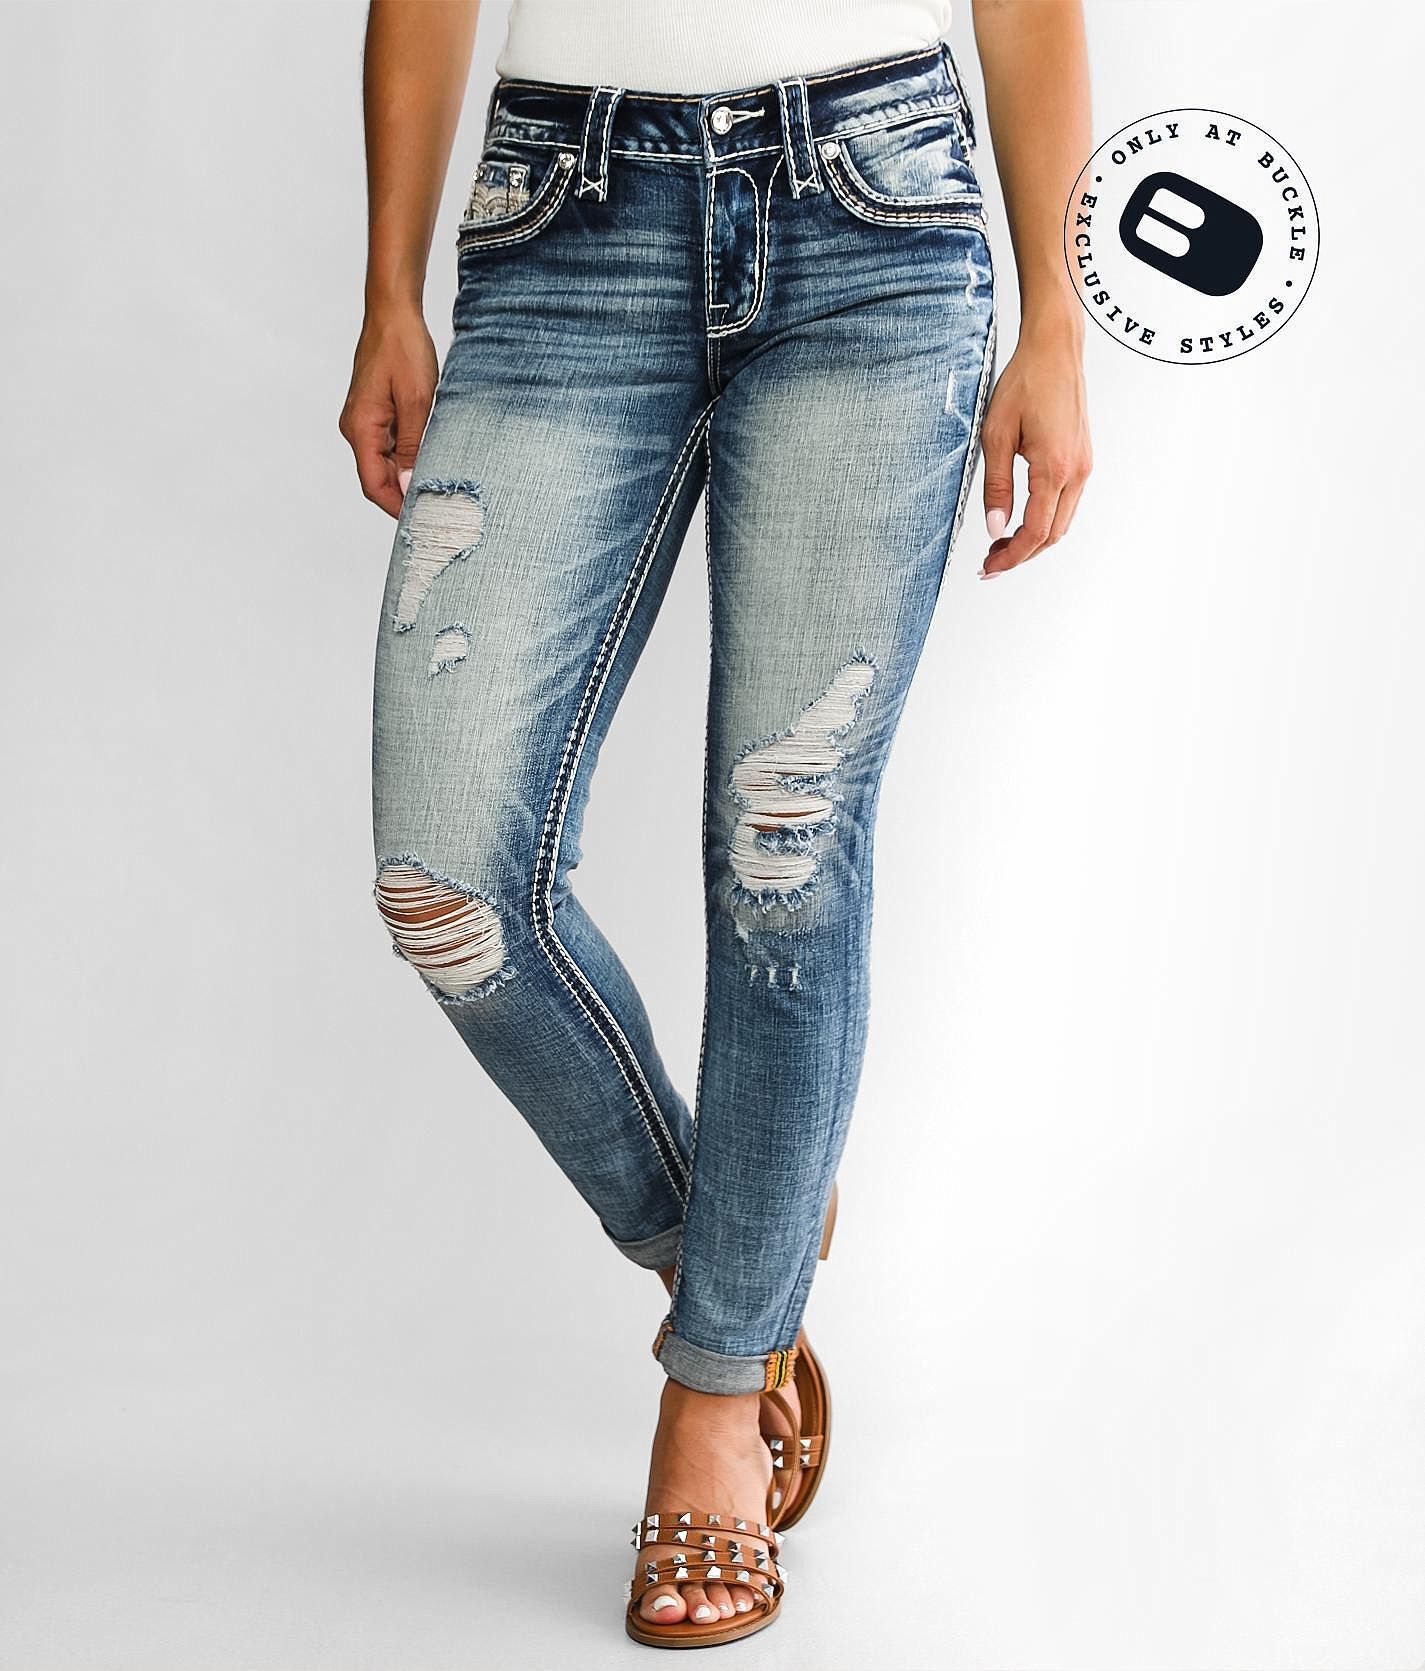 Rock Revival Delu Low Rise Ankle Skinny Jean  - female - Size: 31xX-Short;Ankle;Ankle